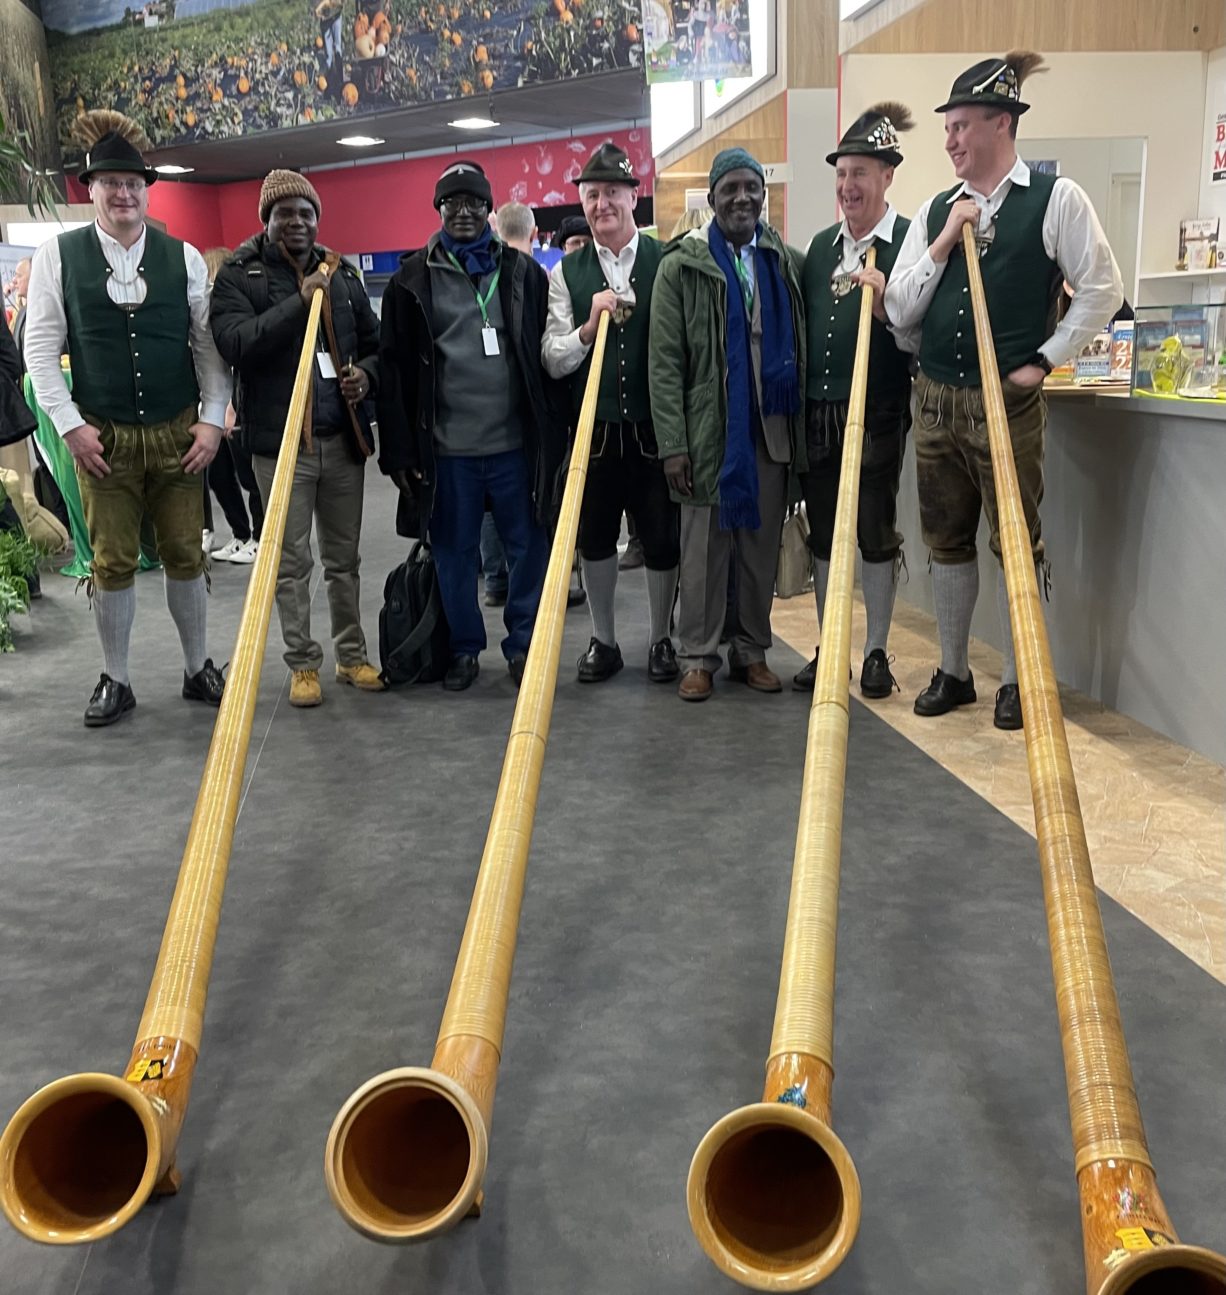 PAFO representatives with alpine horn players during Green Week